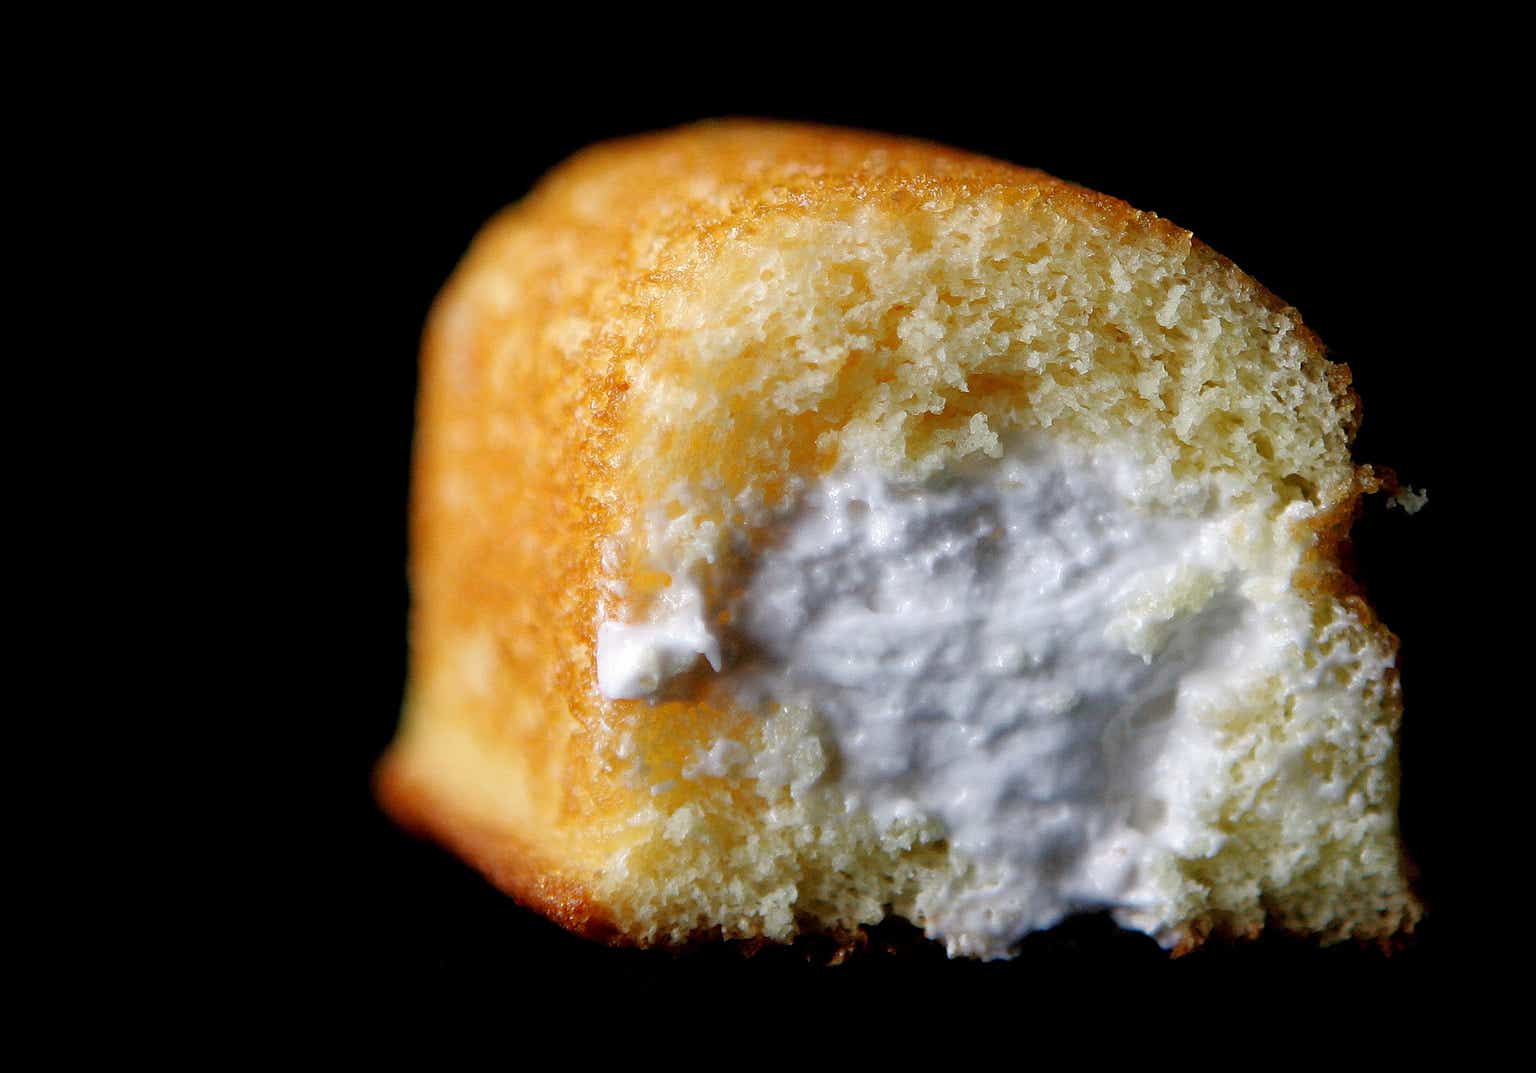 Hostess Brands: Not Such A Sweet Deal For The J. M. Smucker Company